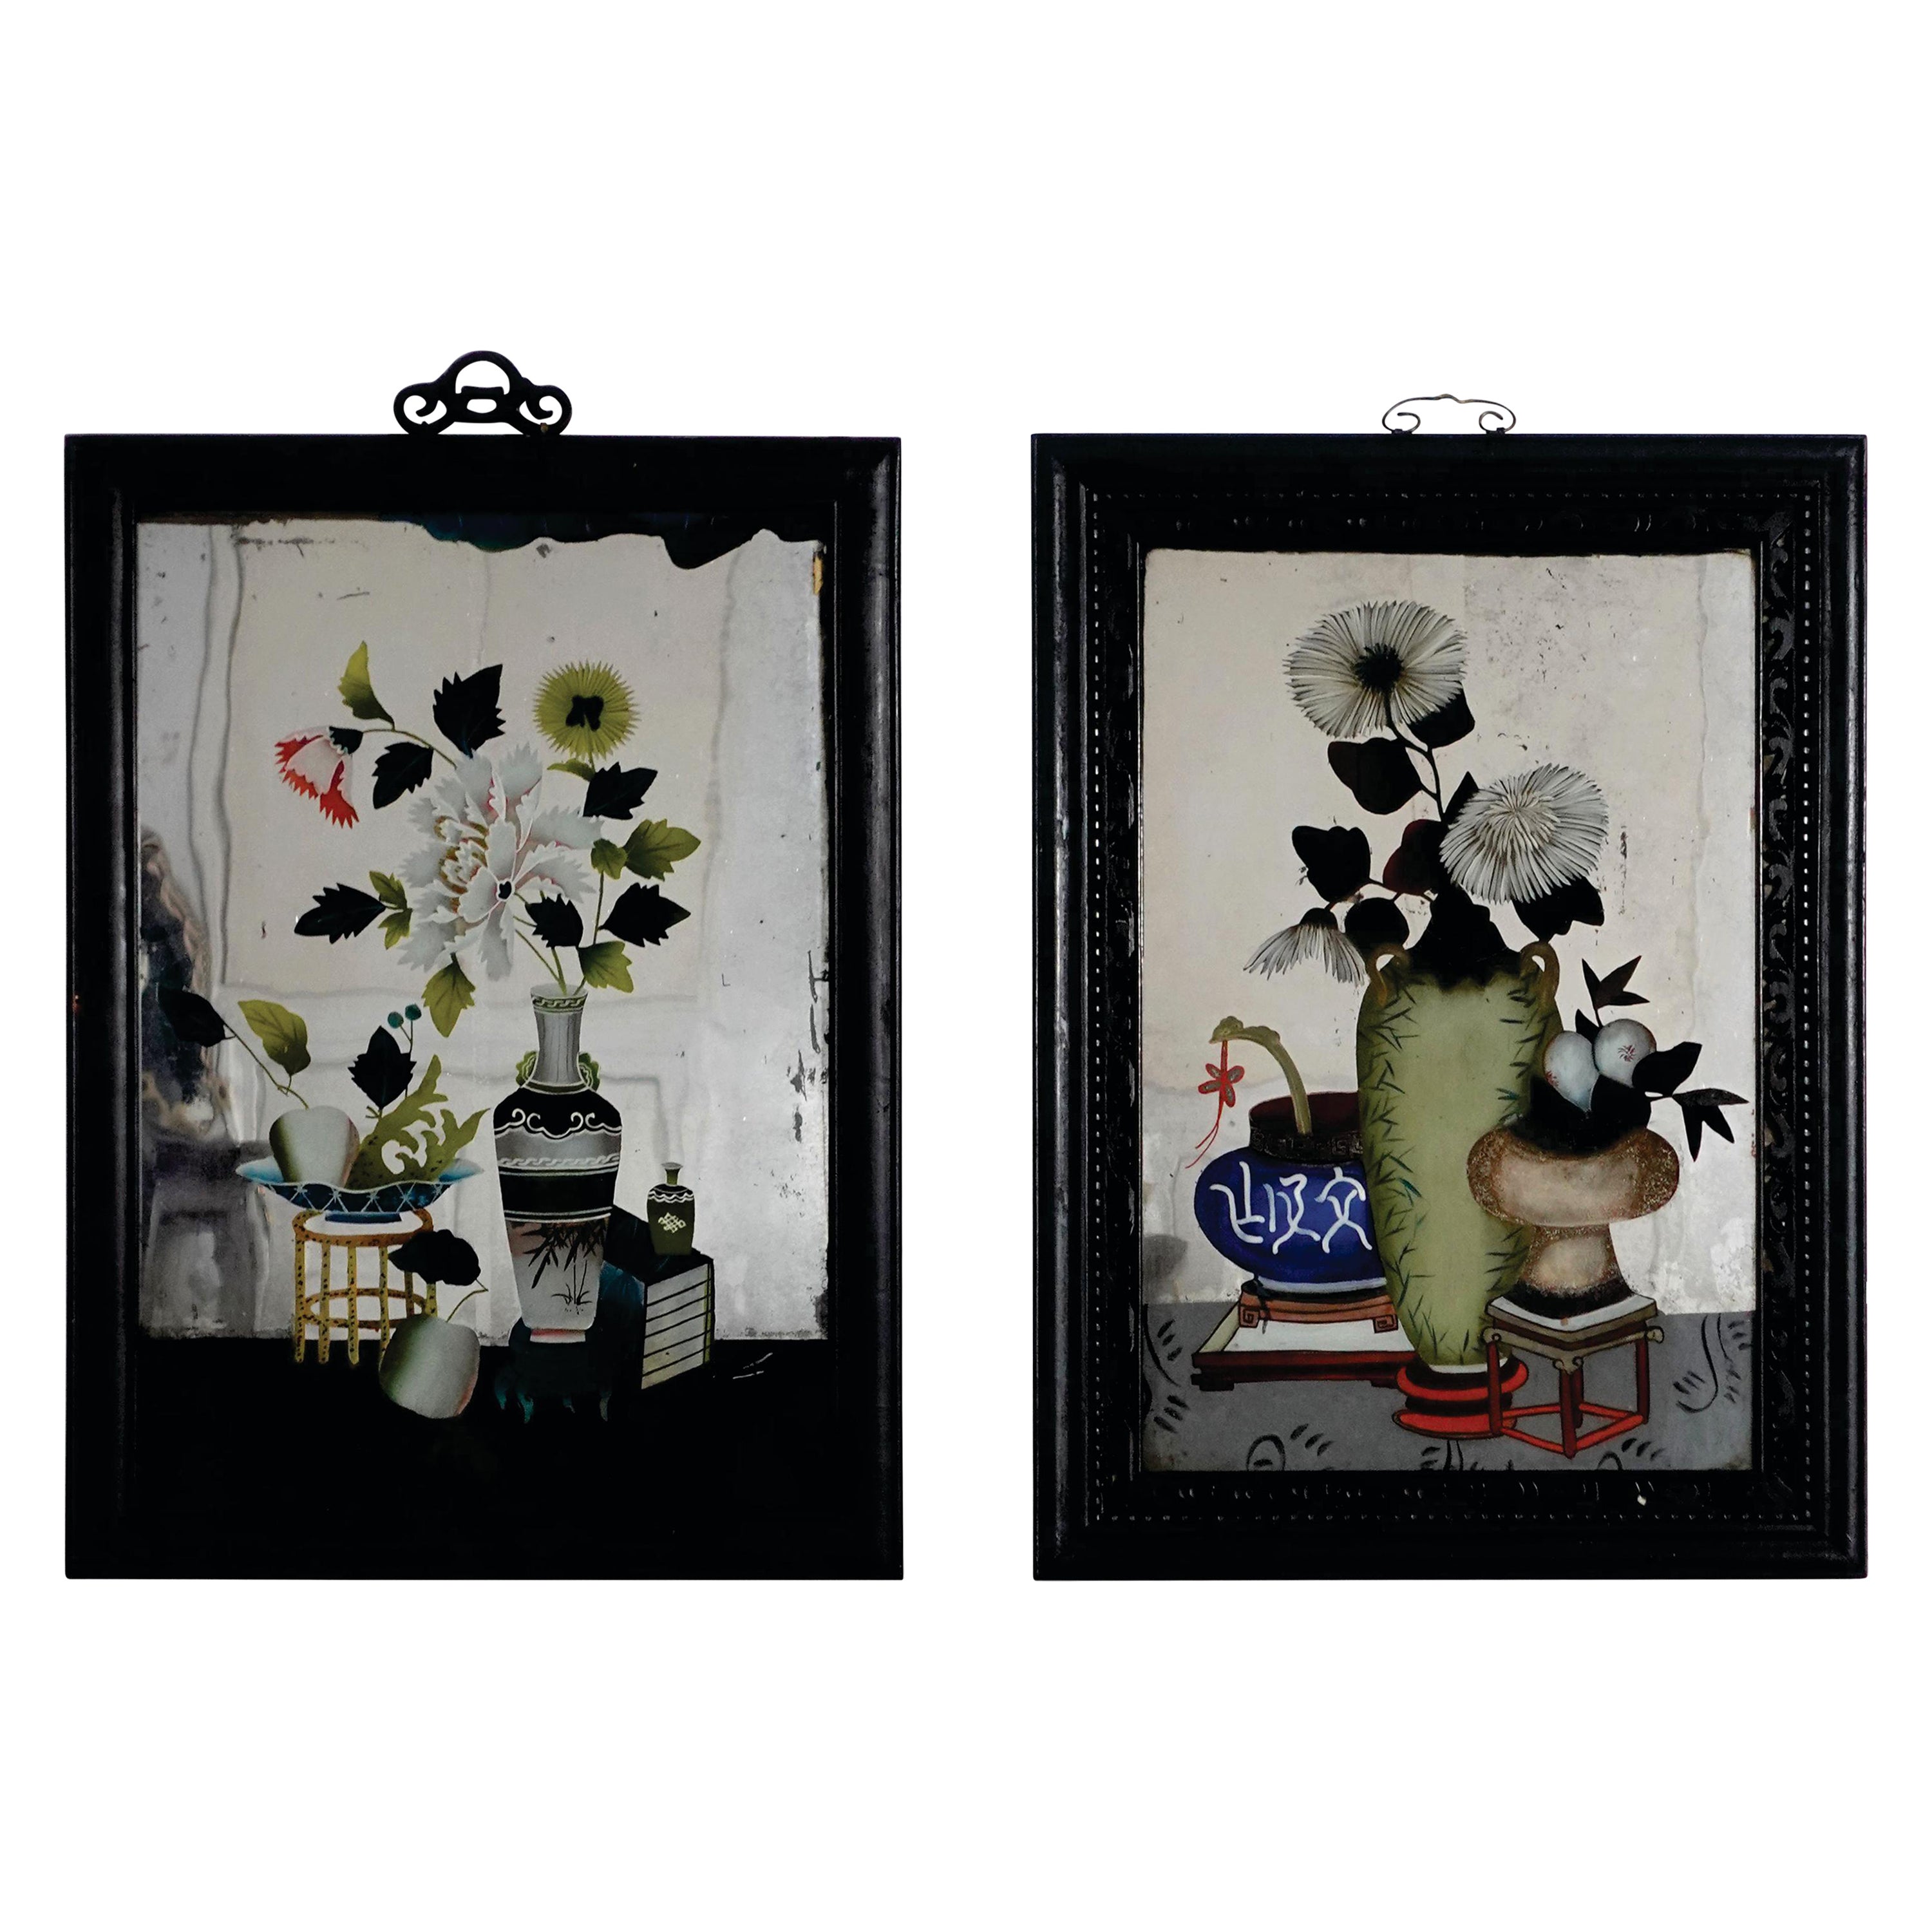 Pair of Chinese Export Reverse Paintings on Mirrors, Still Life#2